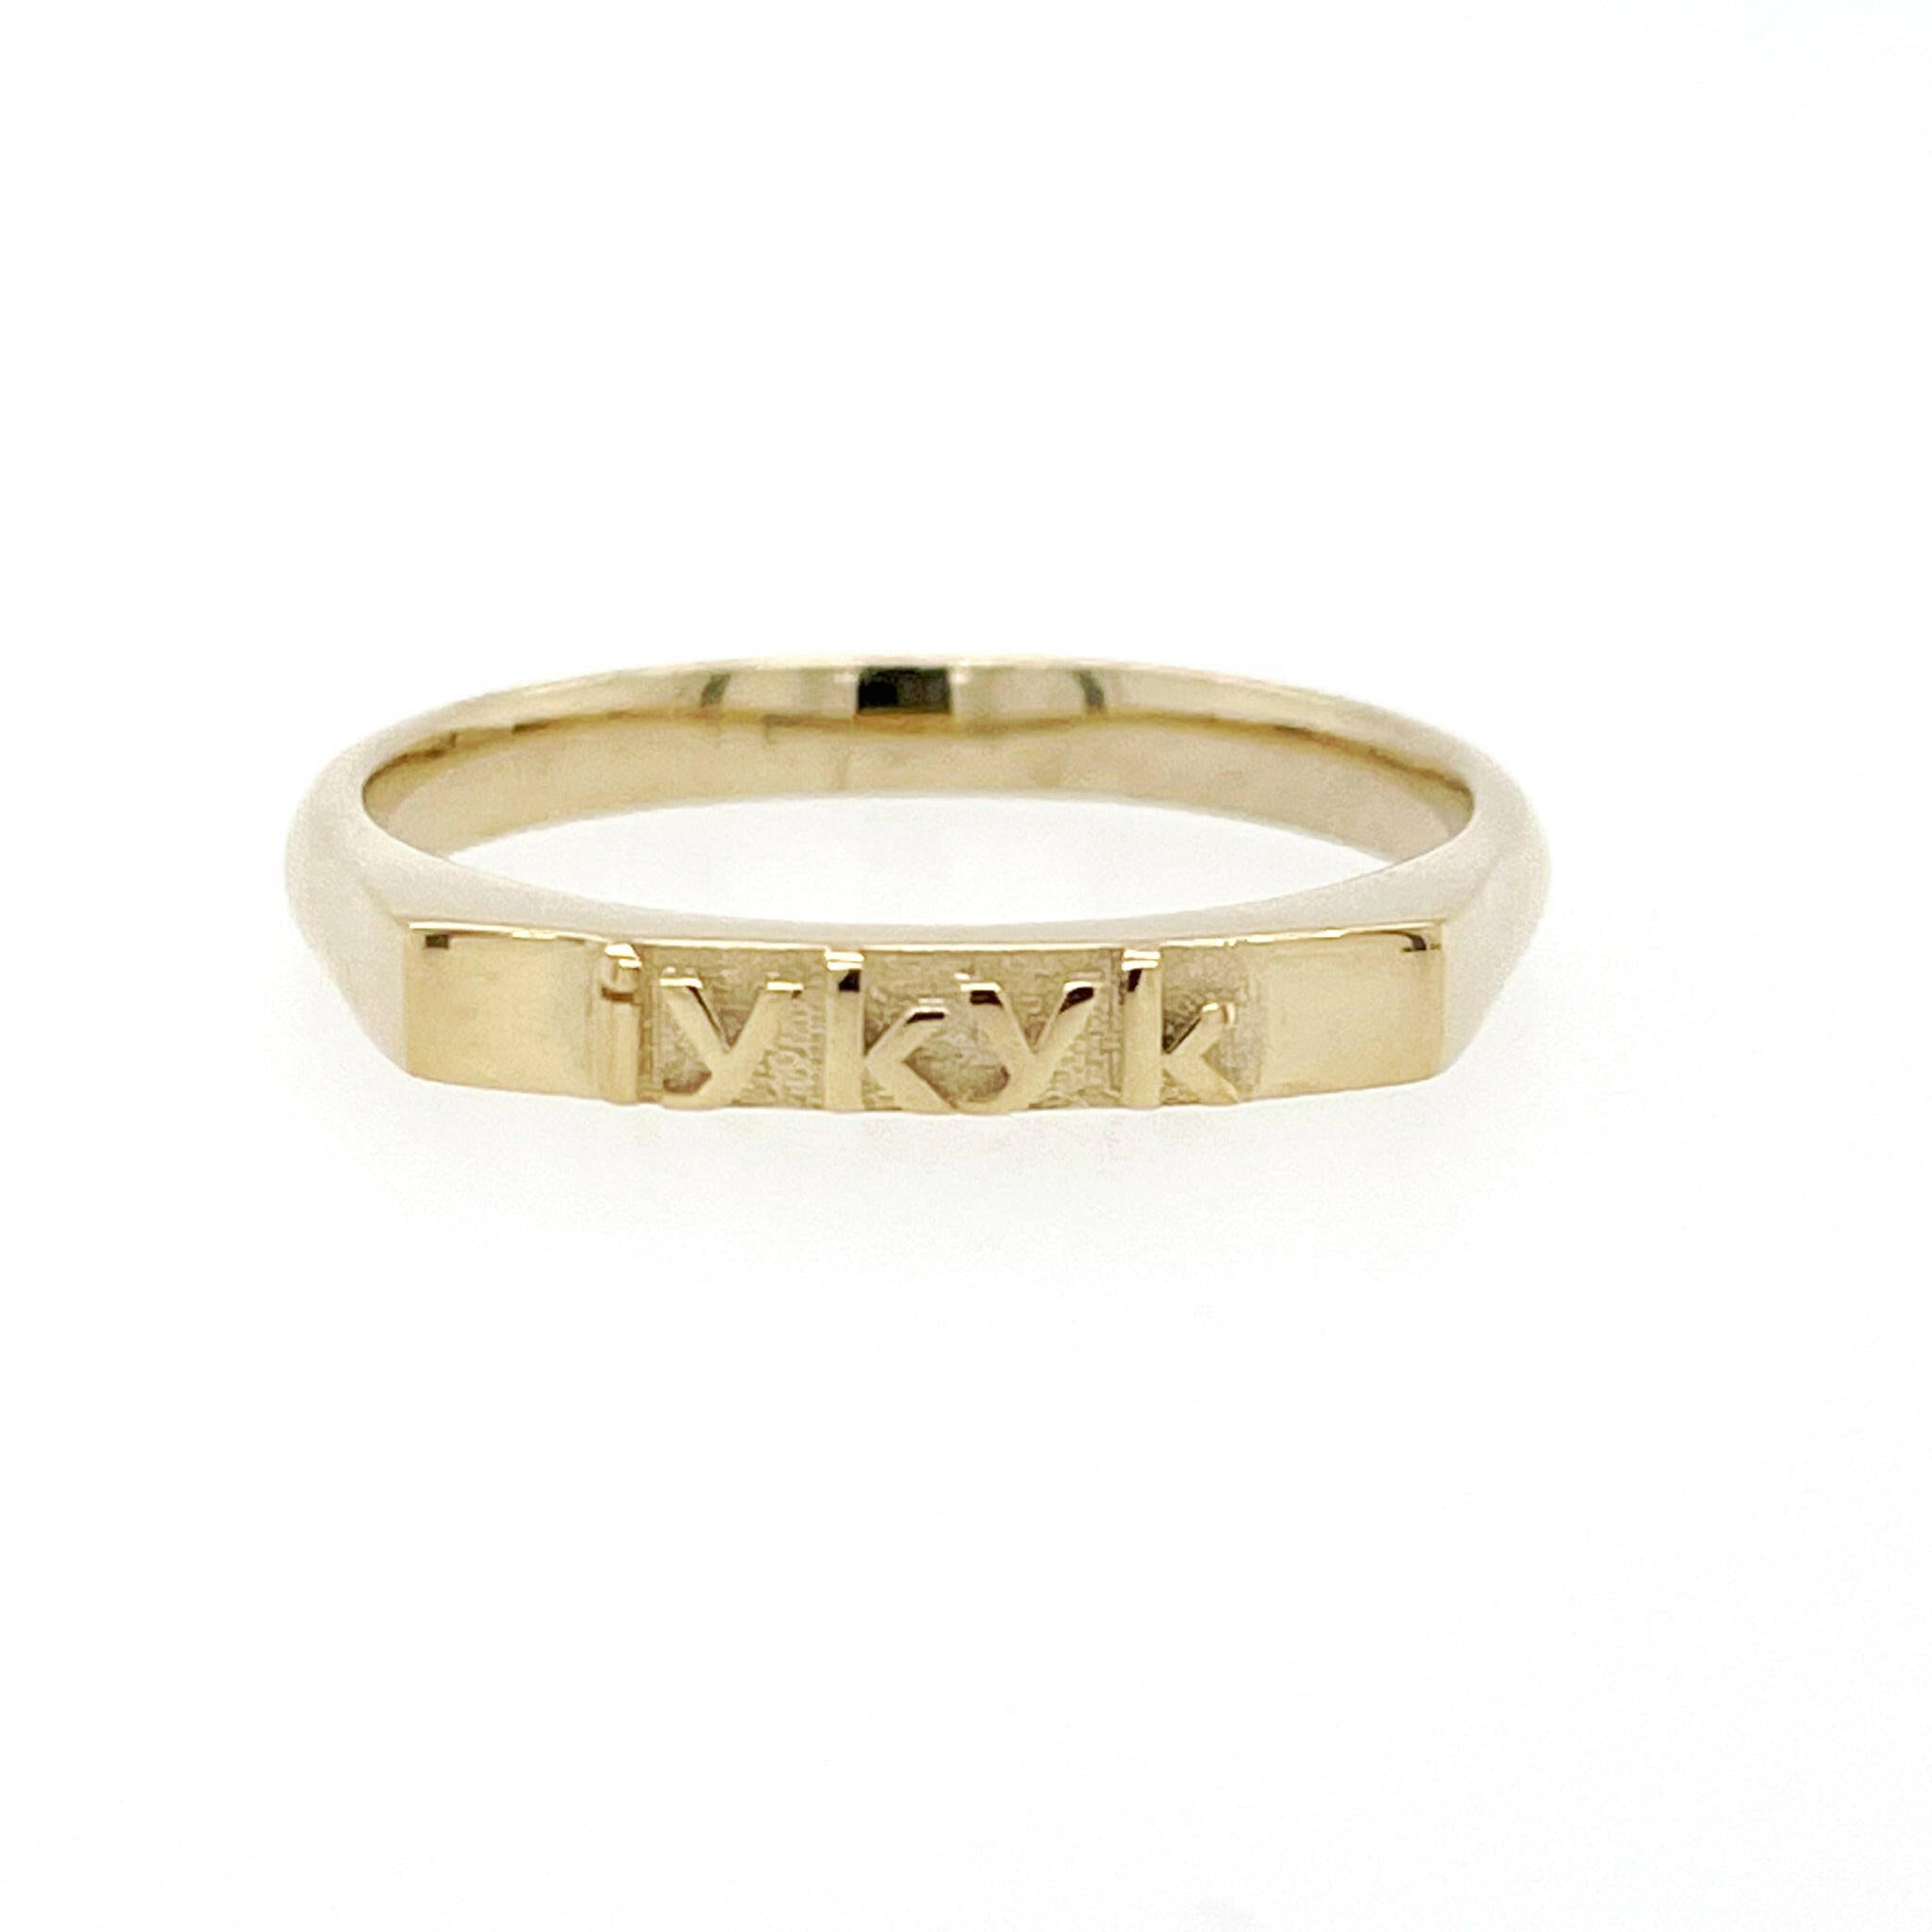 front view of 14 karat yellow gold ring with text that reads "if you know you know" acronym "i y k y k"